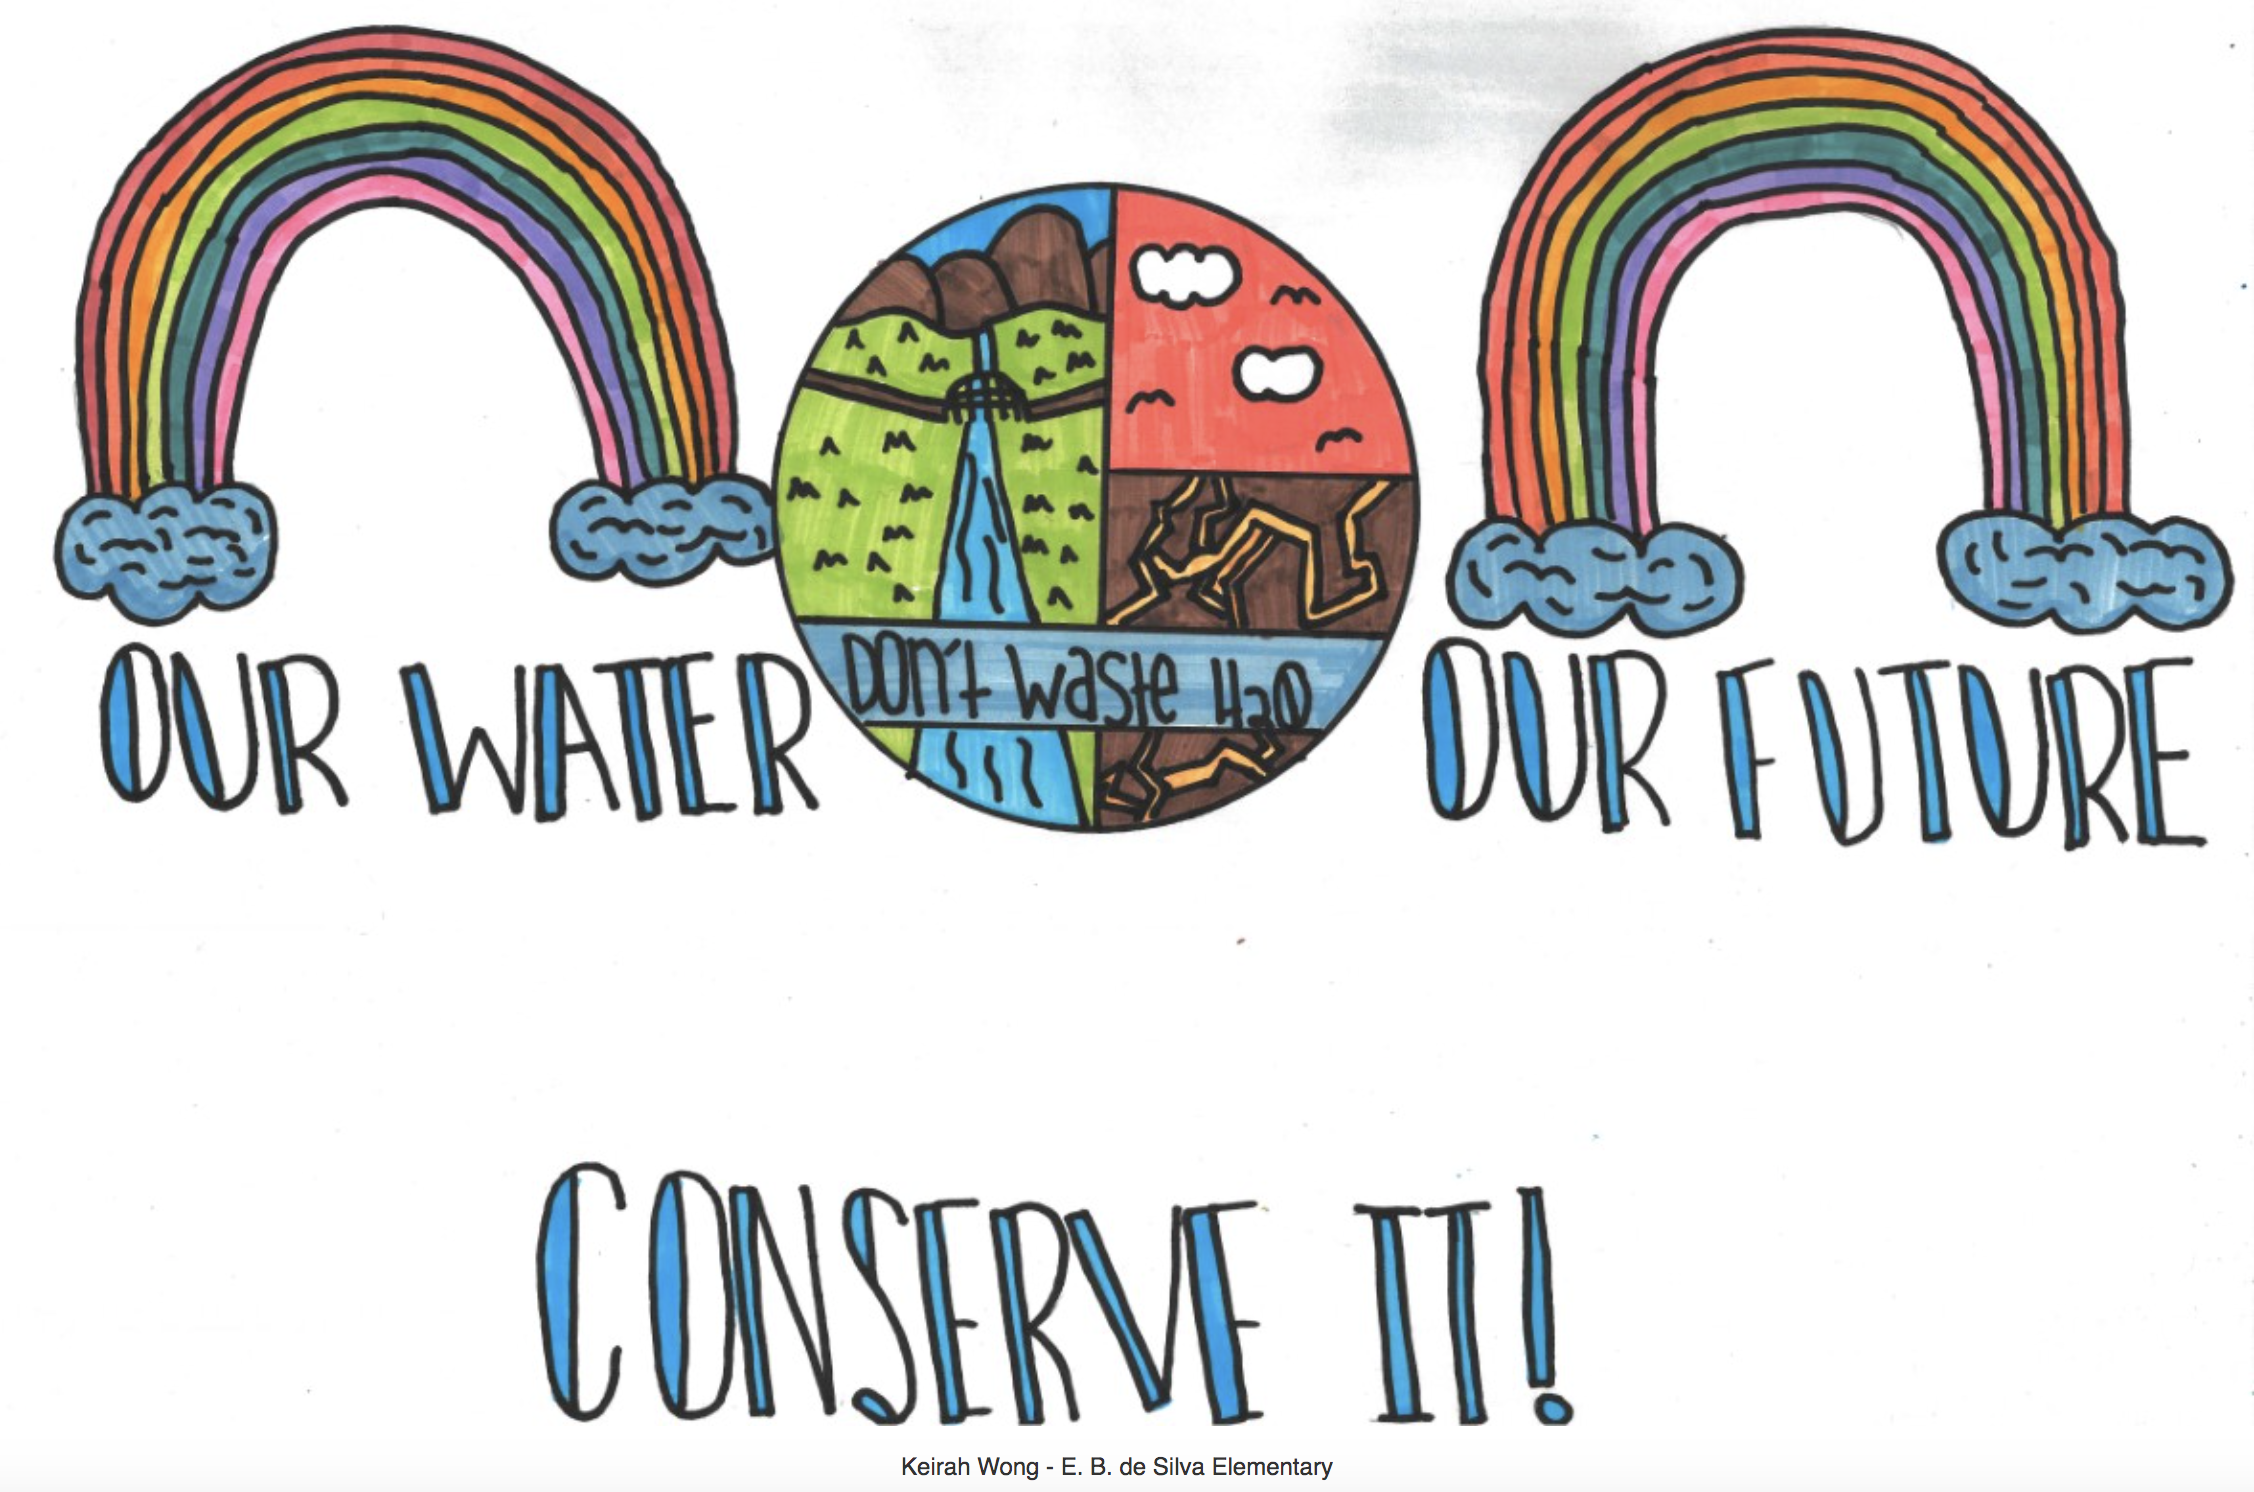 And the winners are — BSU announces water conservation poster contest  student winners - Bonita Springs Florida Weekly